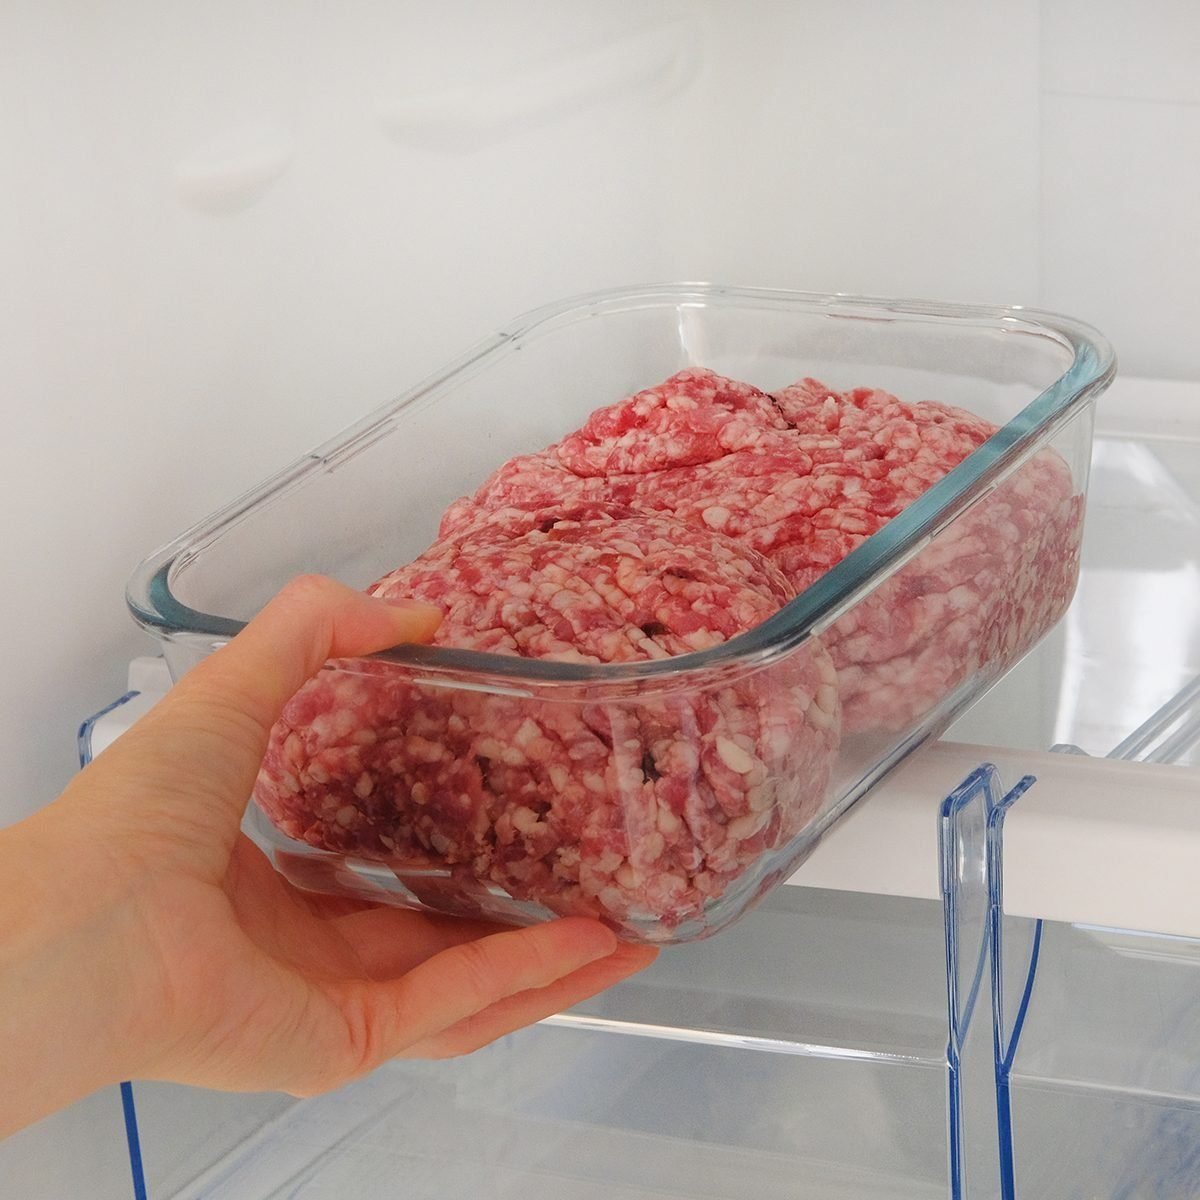 Minced raw meat in glass container is on shelf in open fridge.